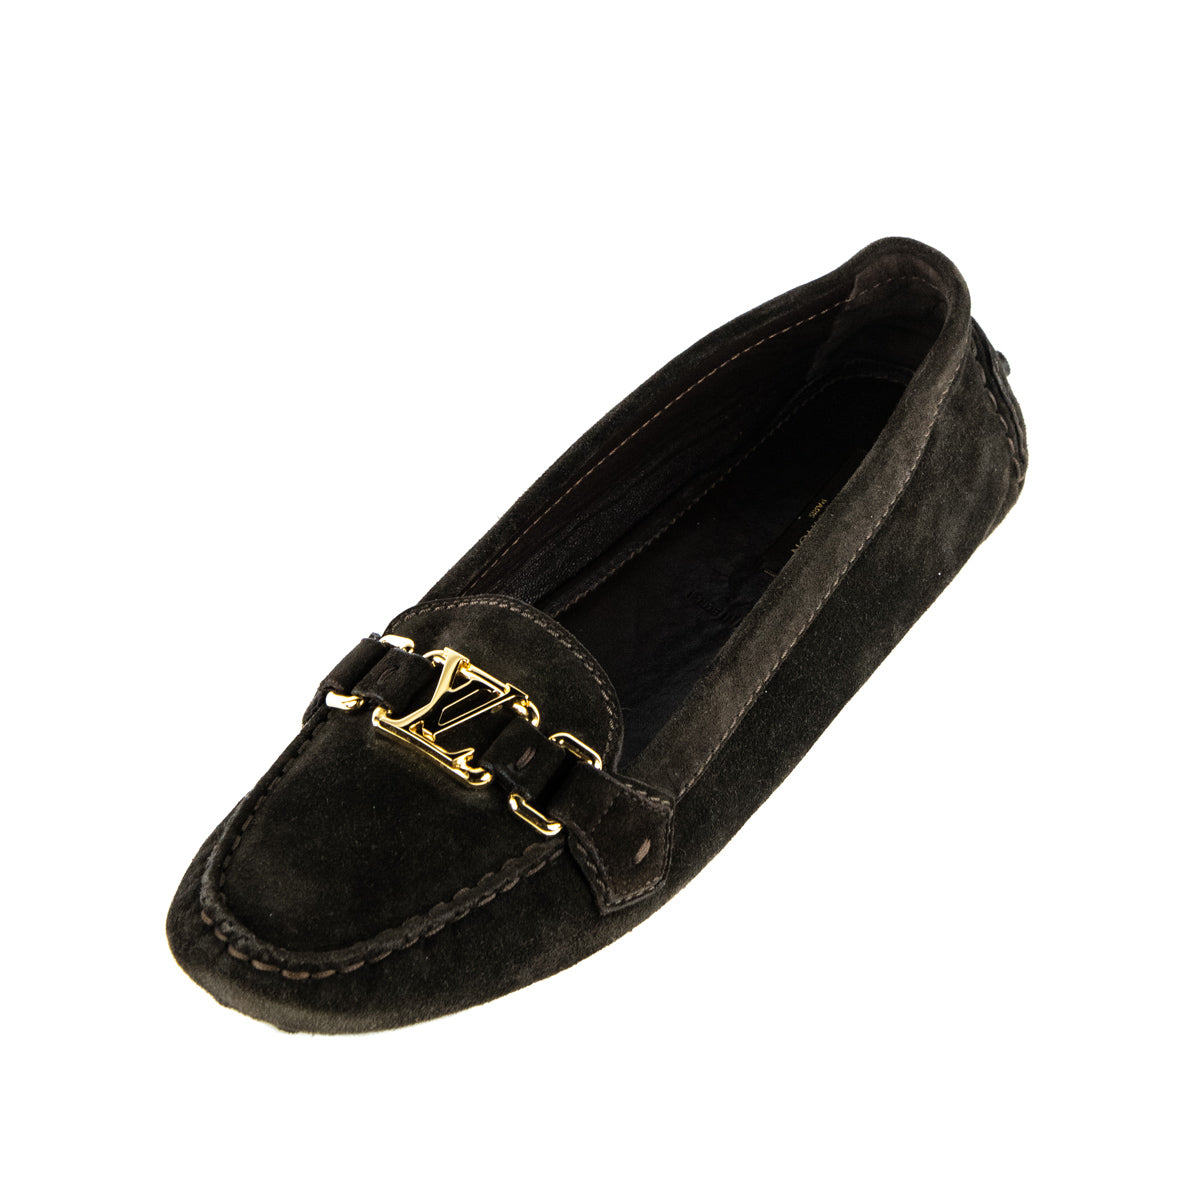 LOUIS VUITTON Suede Moccasins 145  More Than You Can Imagine